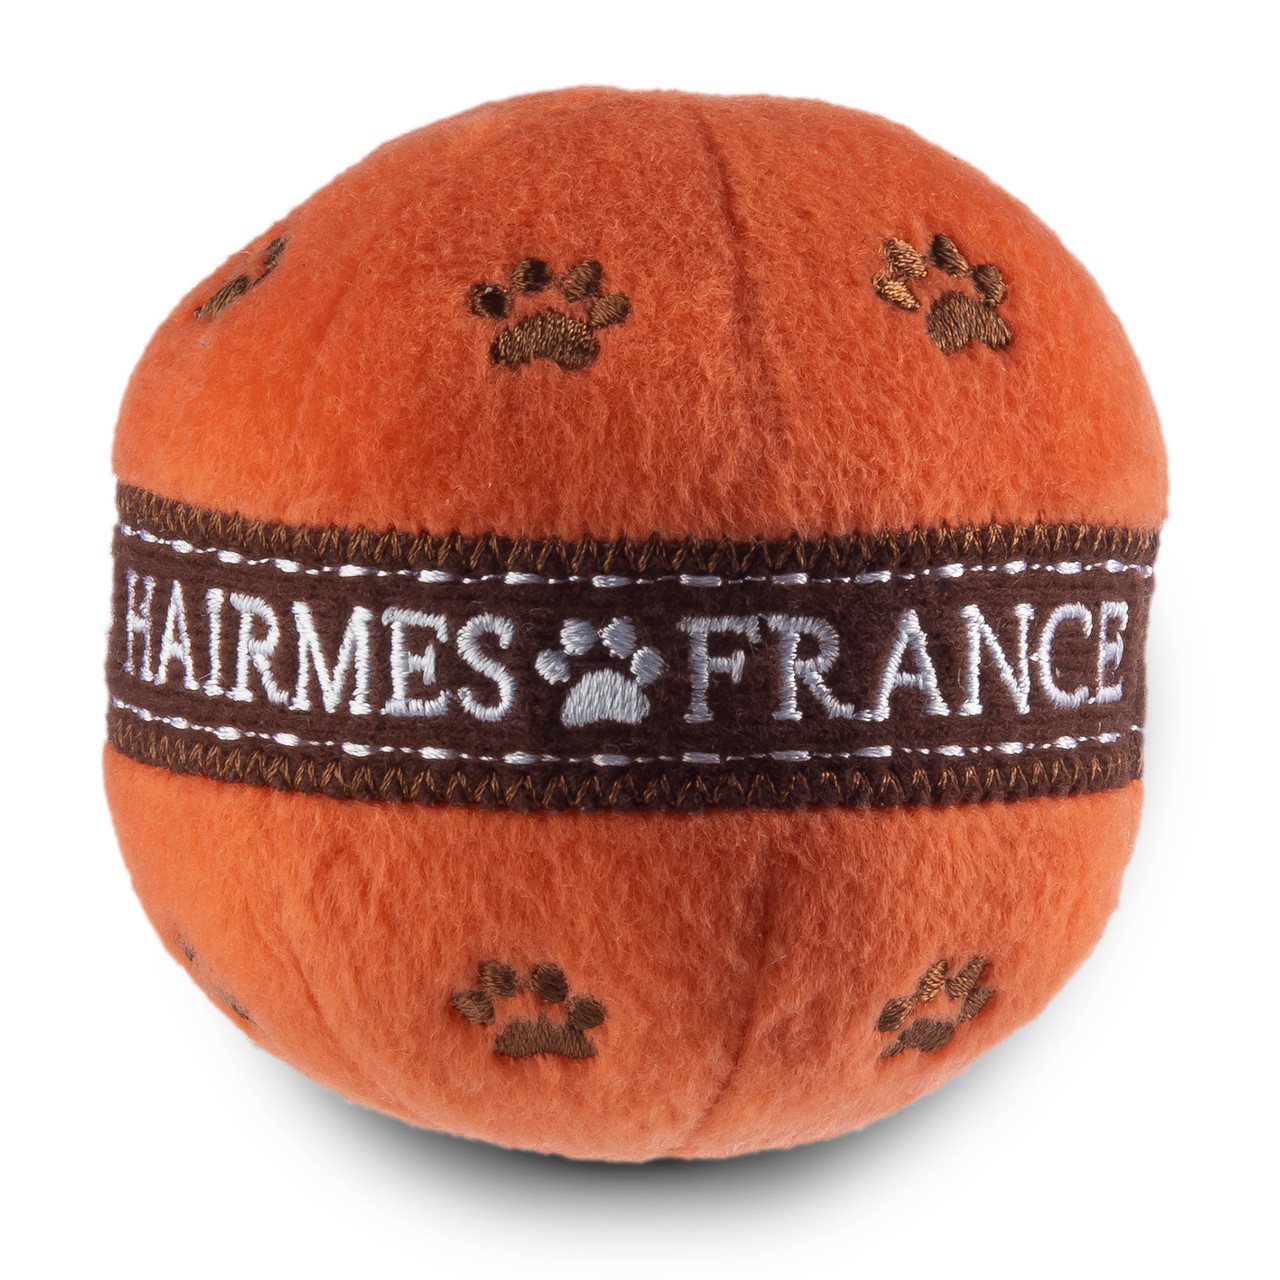 Hairmes Ball Toy